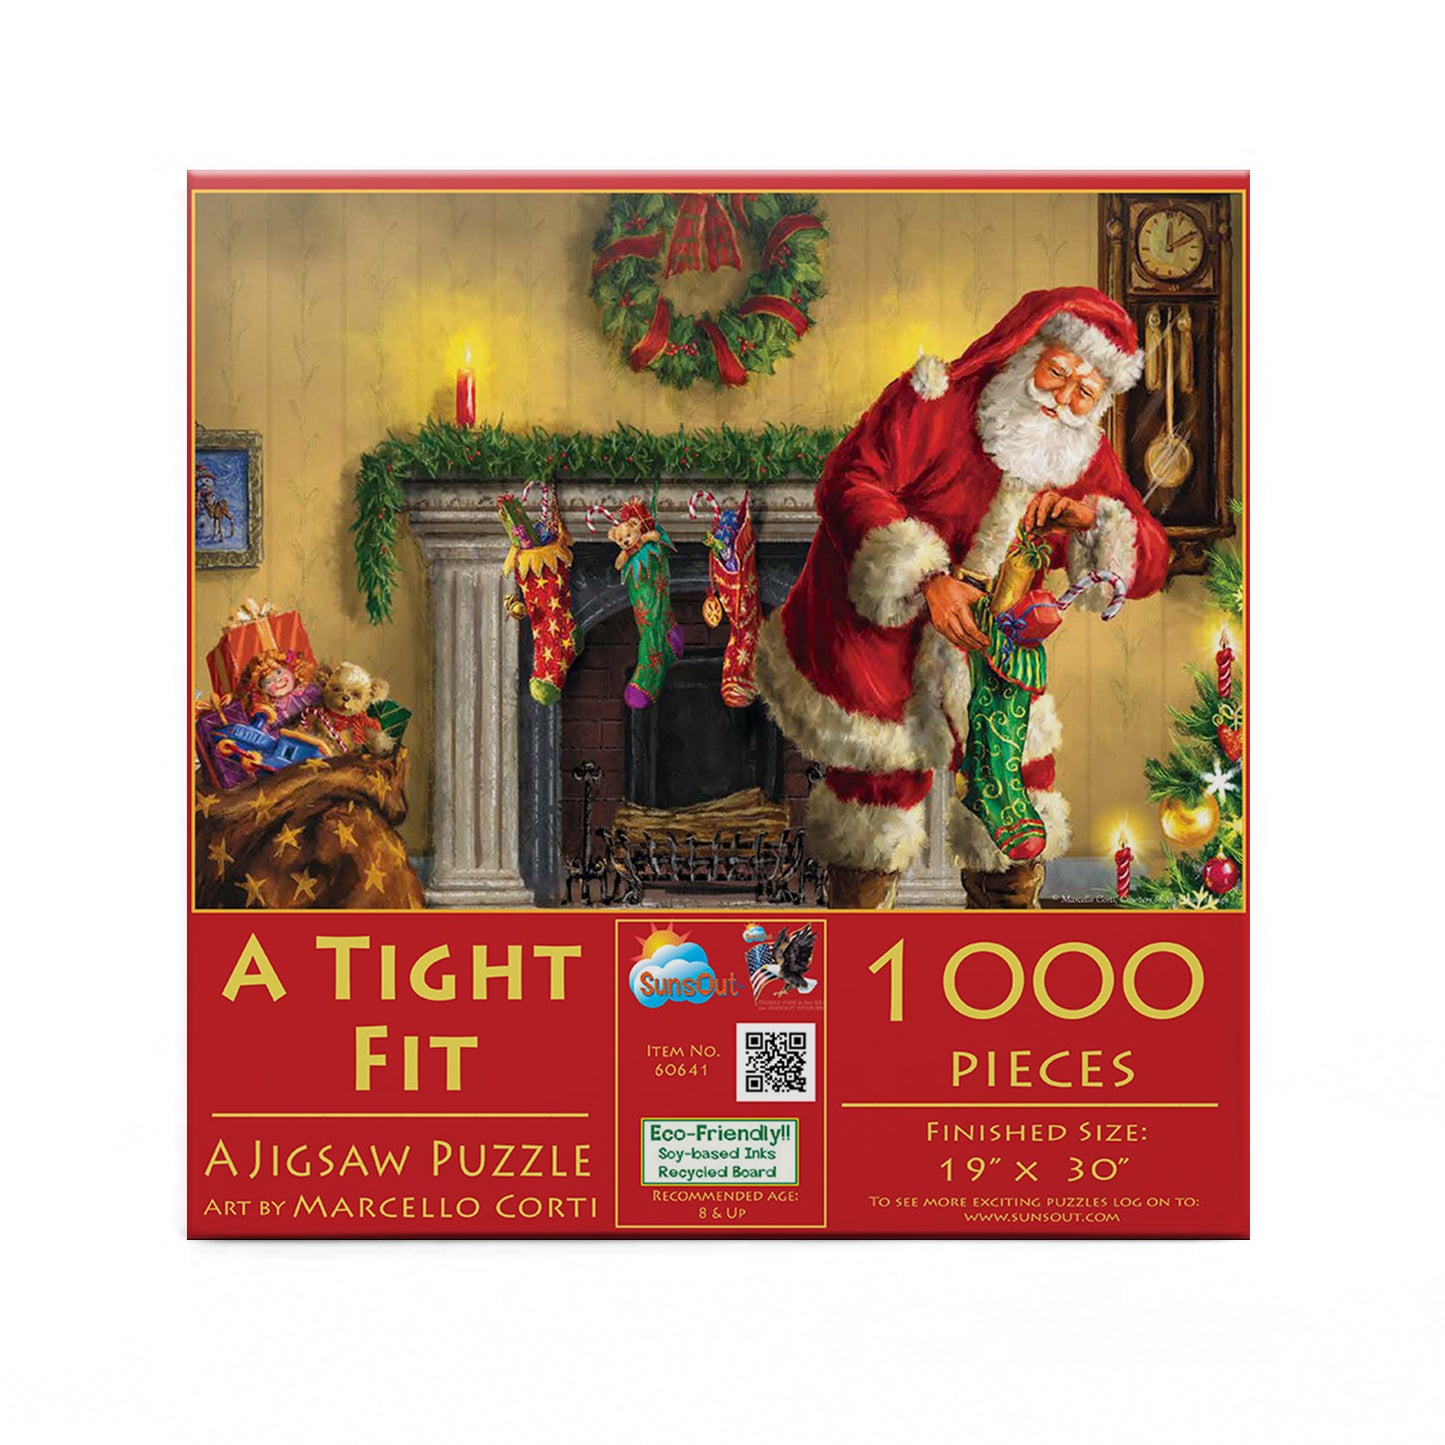 A Tight Fit - 1000 Piece Jigsaw Puzzle